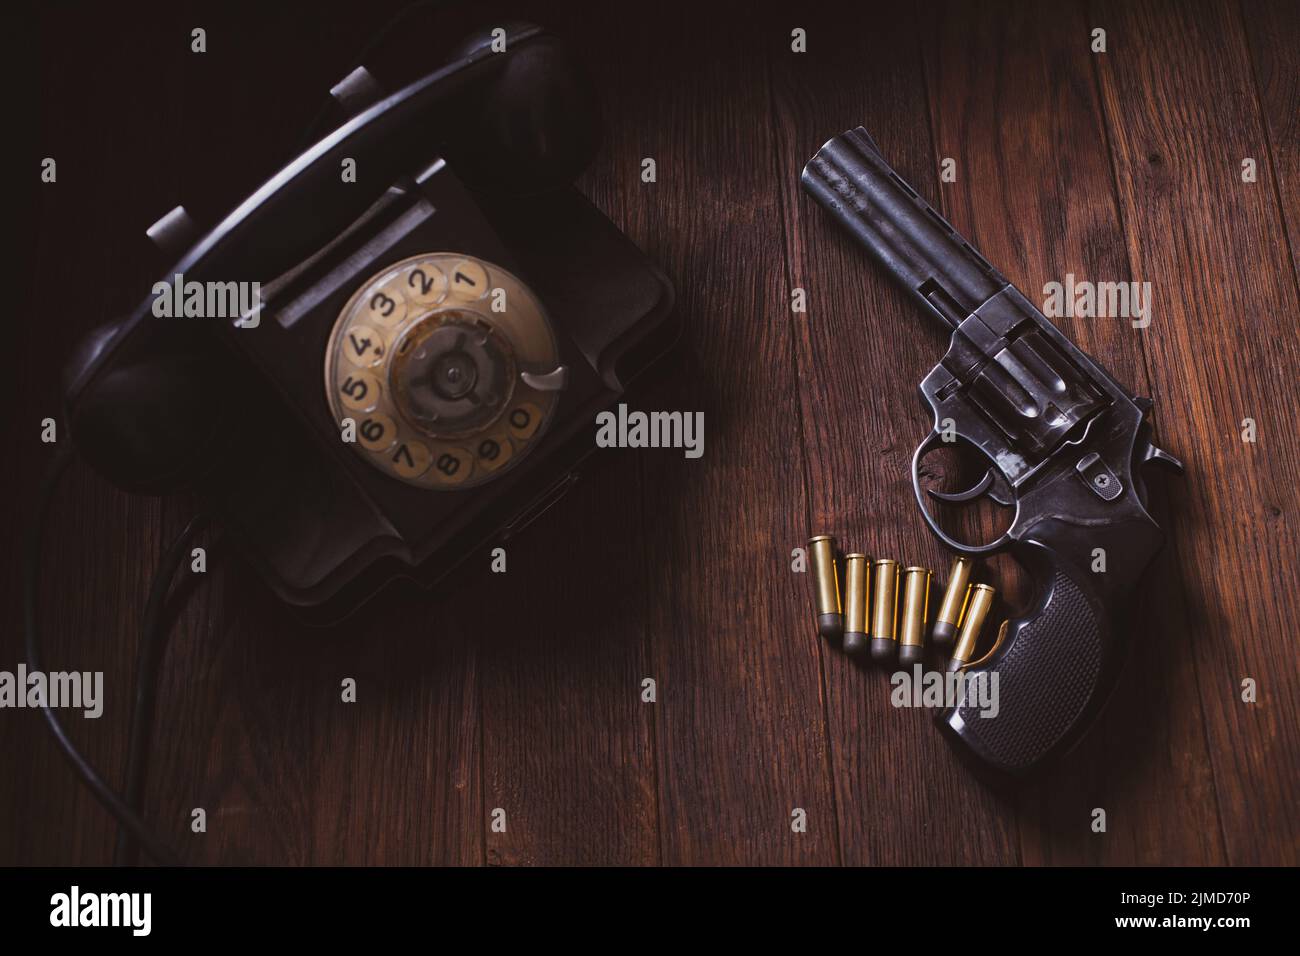 Noir fiction scene - handgun with cartridges and rotary phone on wooden table Stock Photo